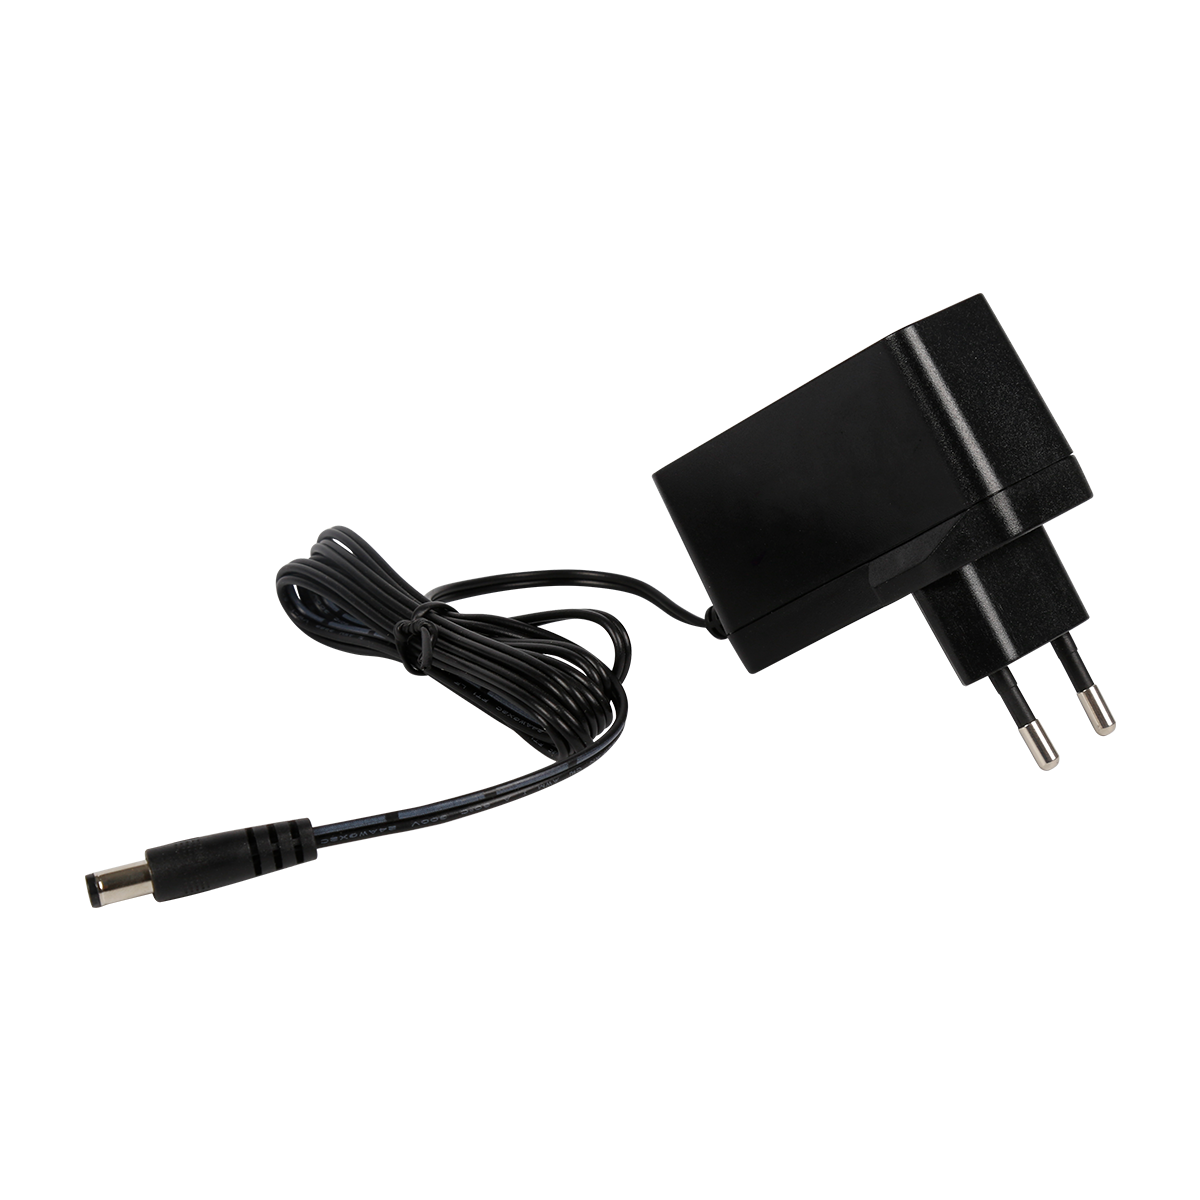 The development history of switching power adapter(图1)